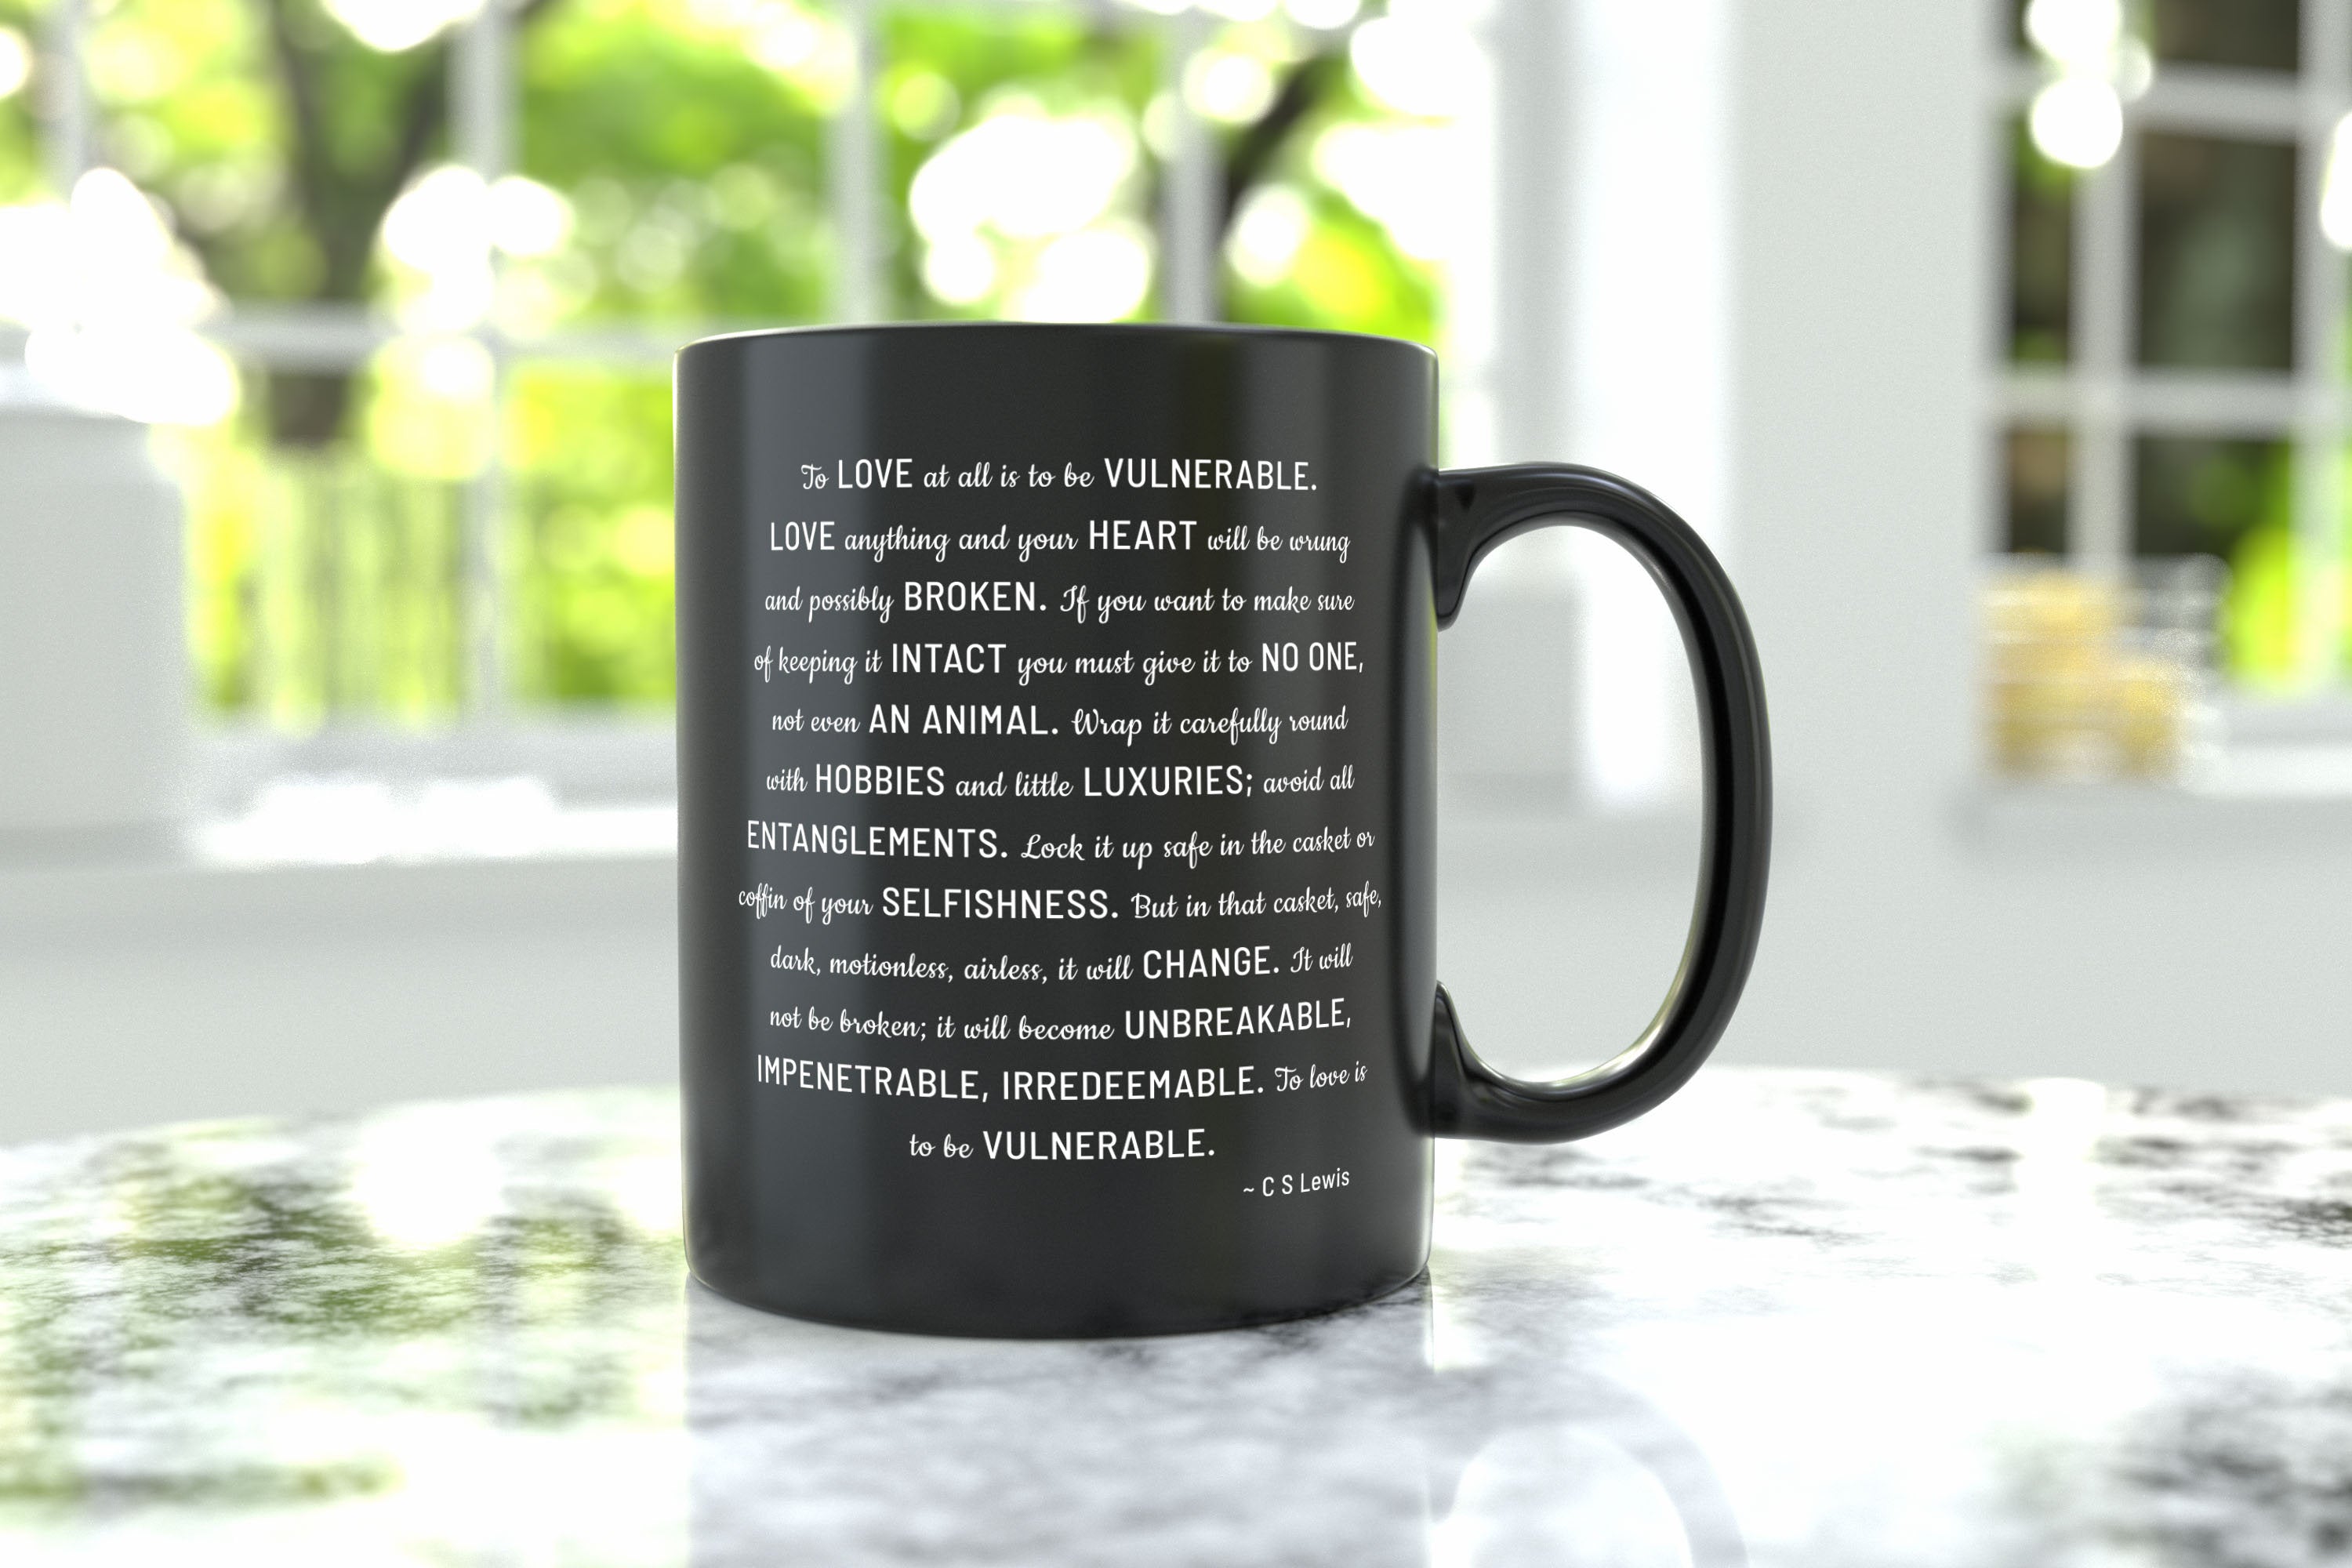 CS Lewis To Love Is To Be Vulnerable, Unique Black & White Coffee Mug Gift For Her, Large Tea Mug with Love Quote